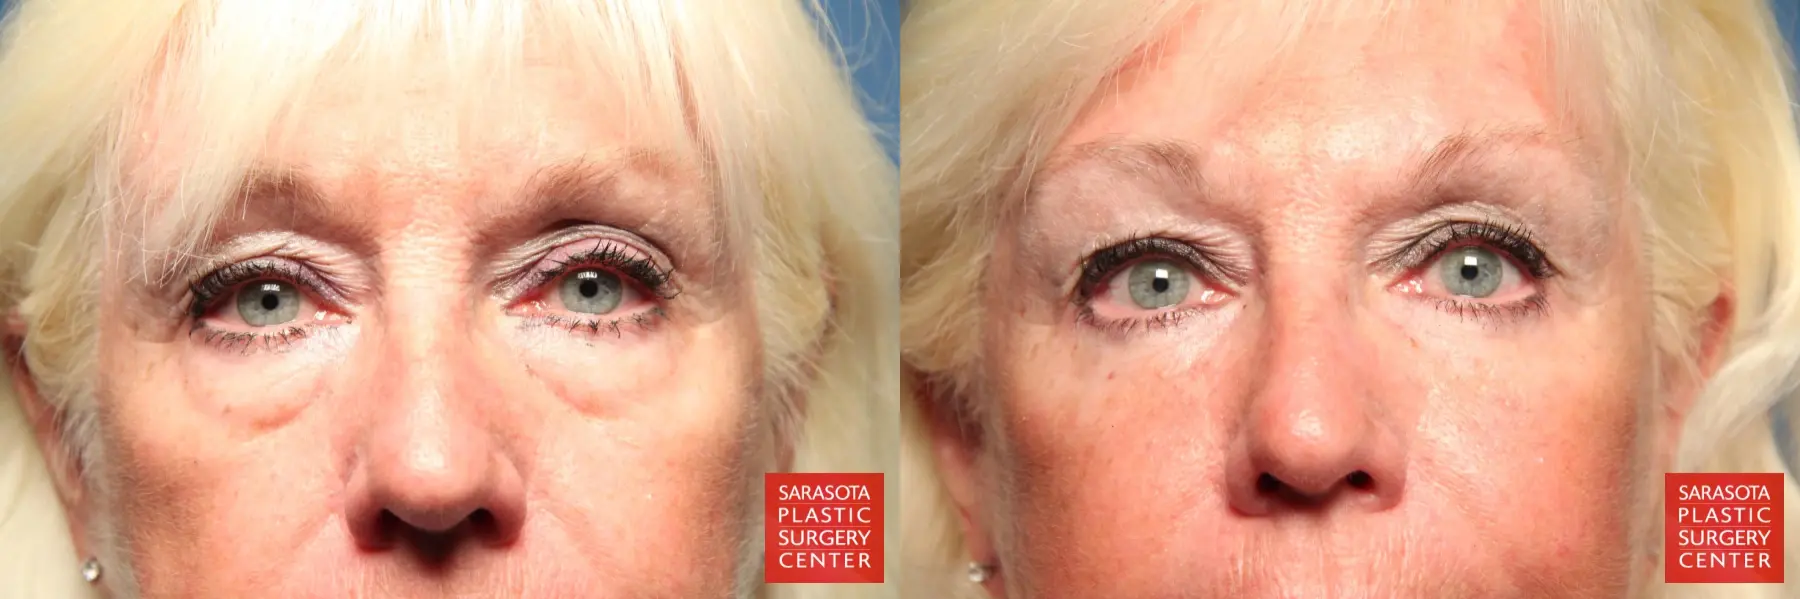 Eyelid Surgery: Patient 1 - Before and After 1